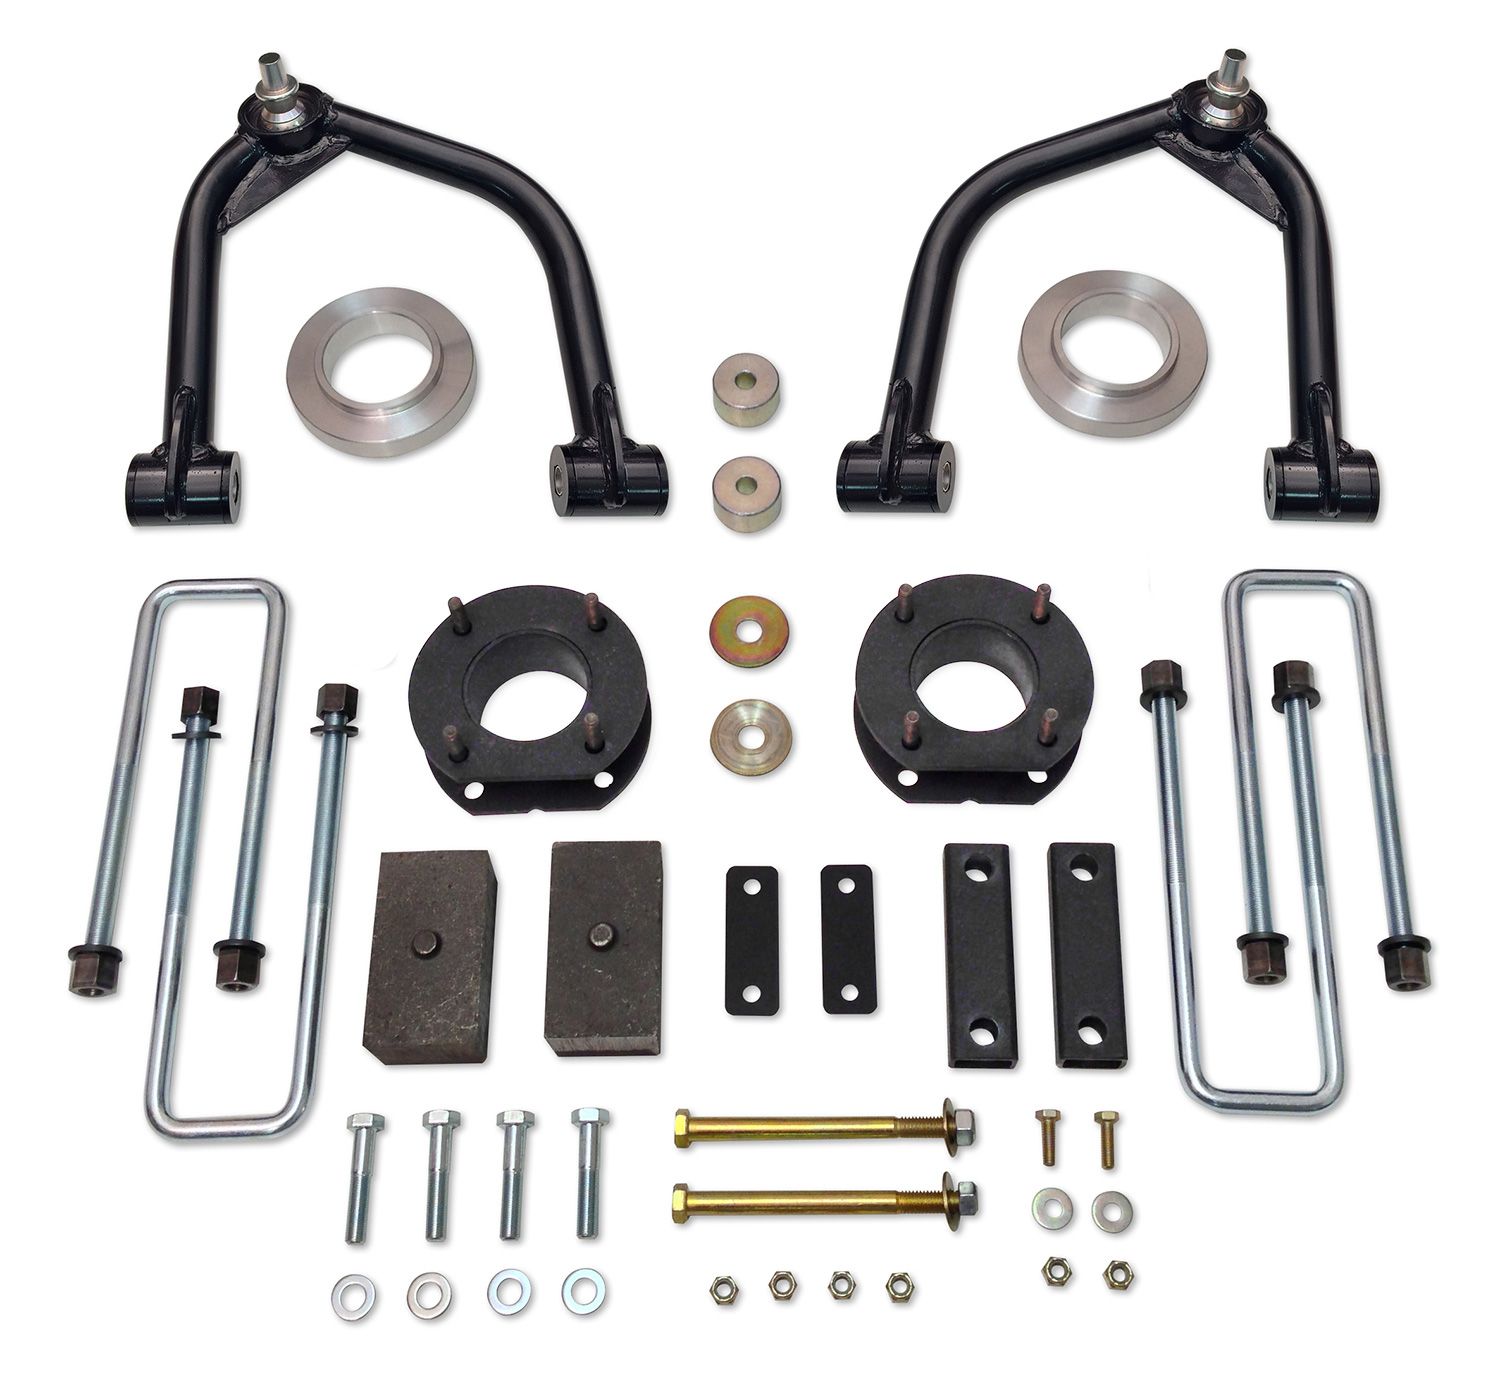 Tuff Country 54075 4" Uni-Ball Lift Kit by (Excludes TRD Pro) (No Shocks) 4x4 & 2wd for Toyota Tundra 2007-2021